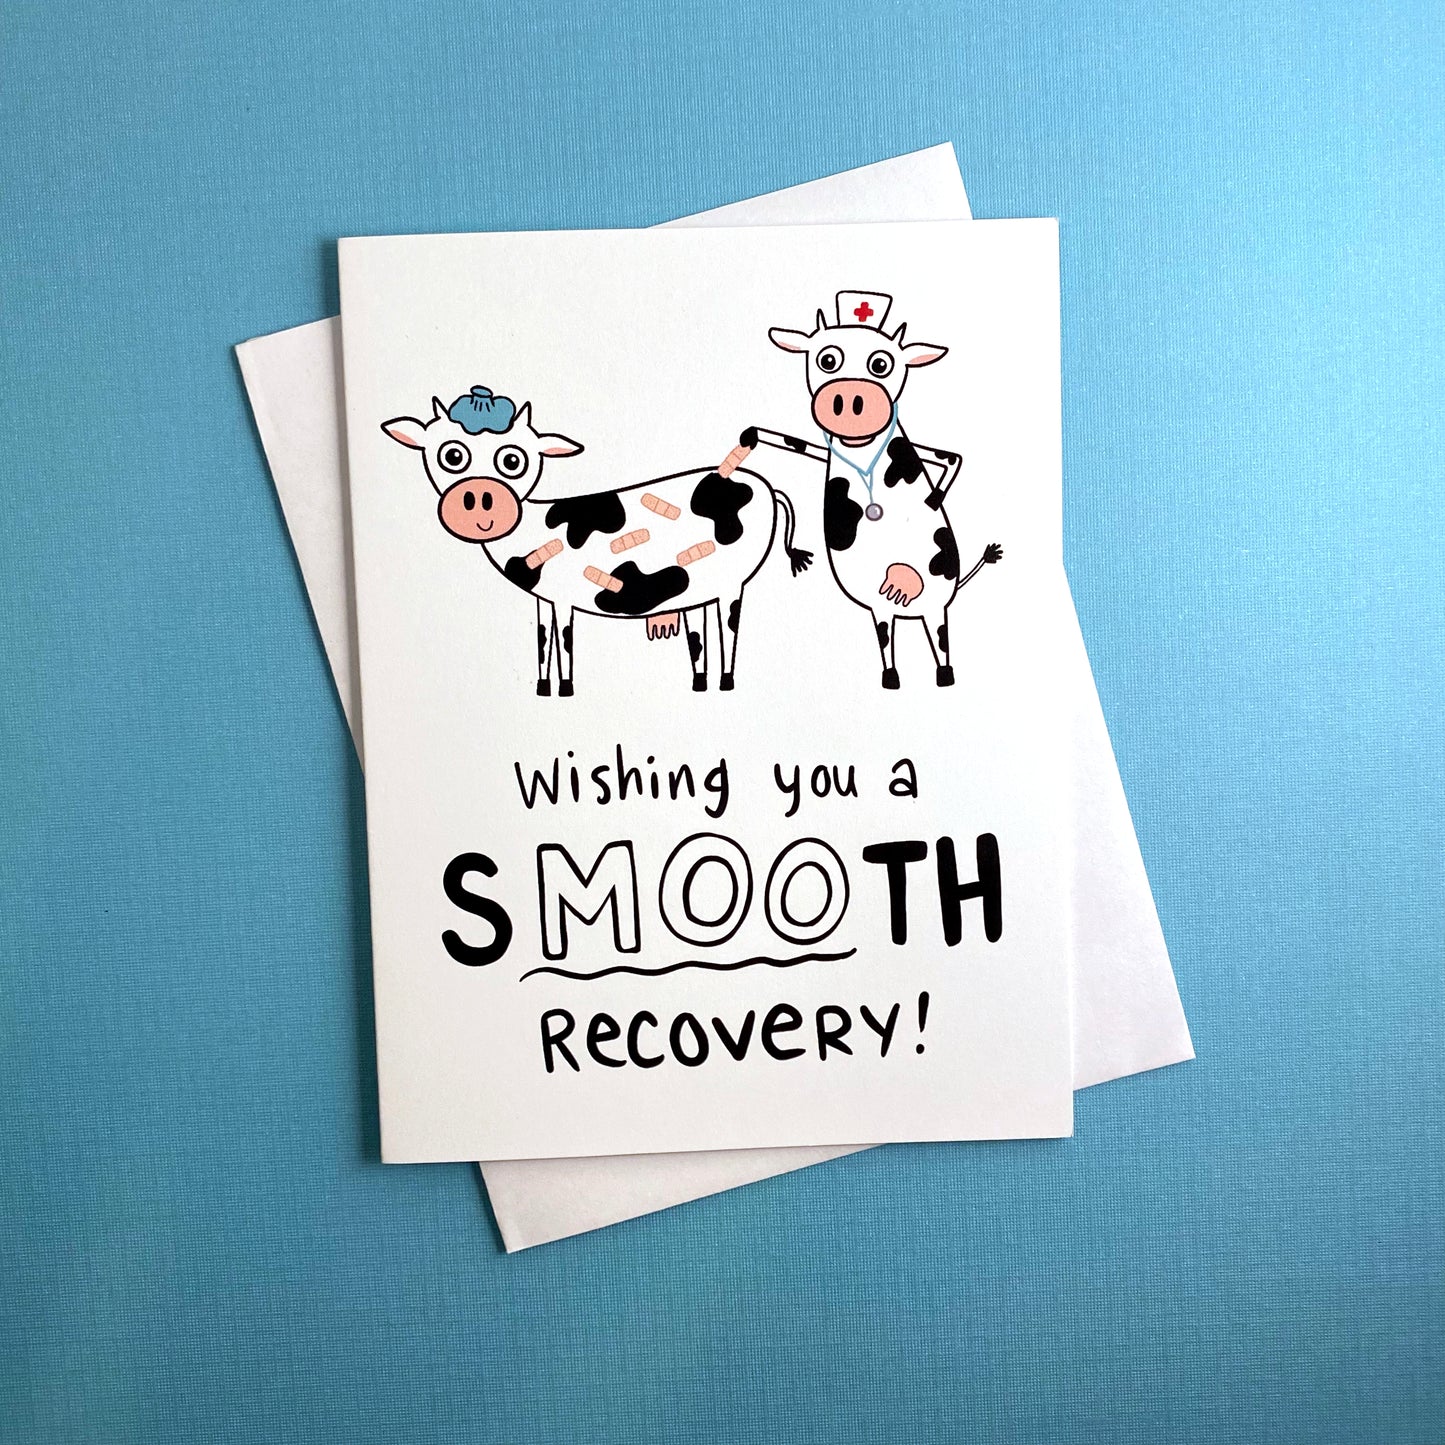 Smooth Recovery Cows Get Well Card